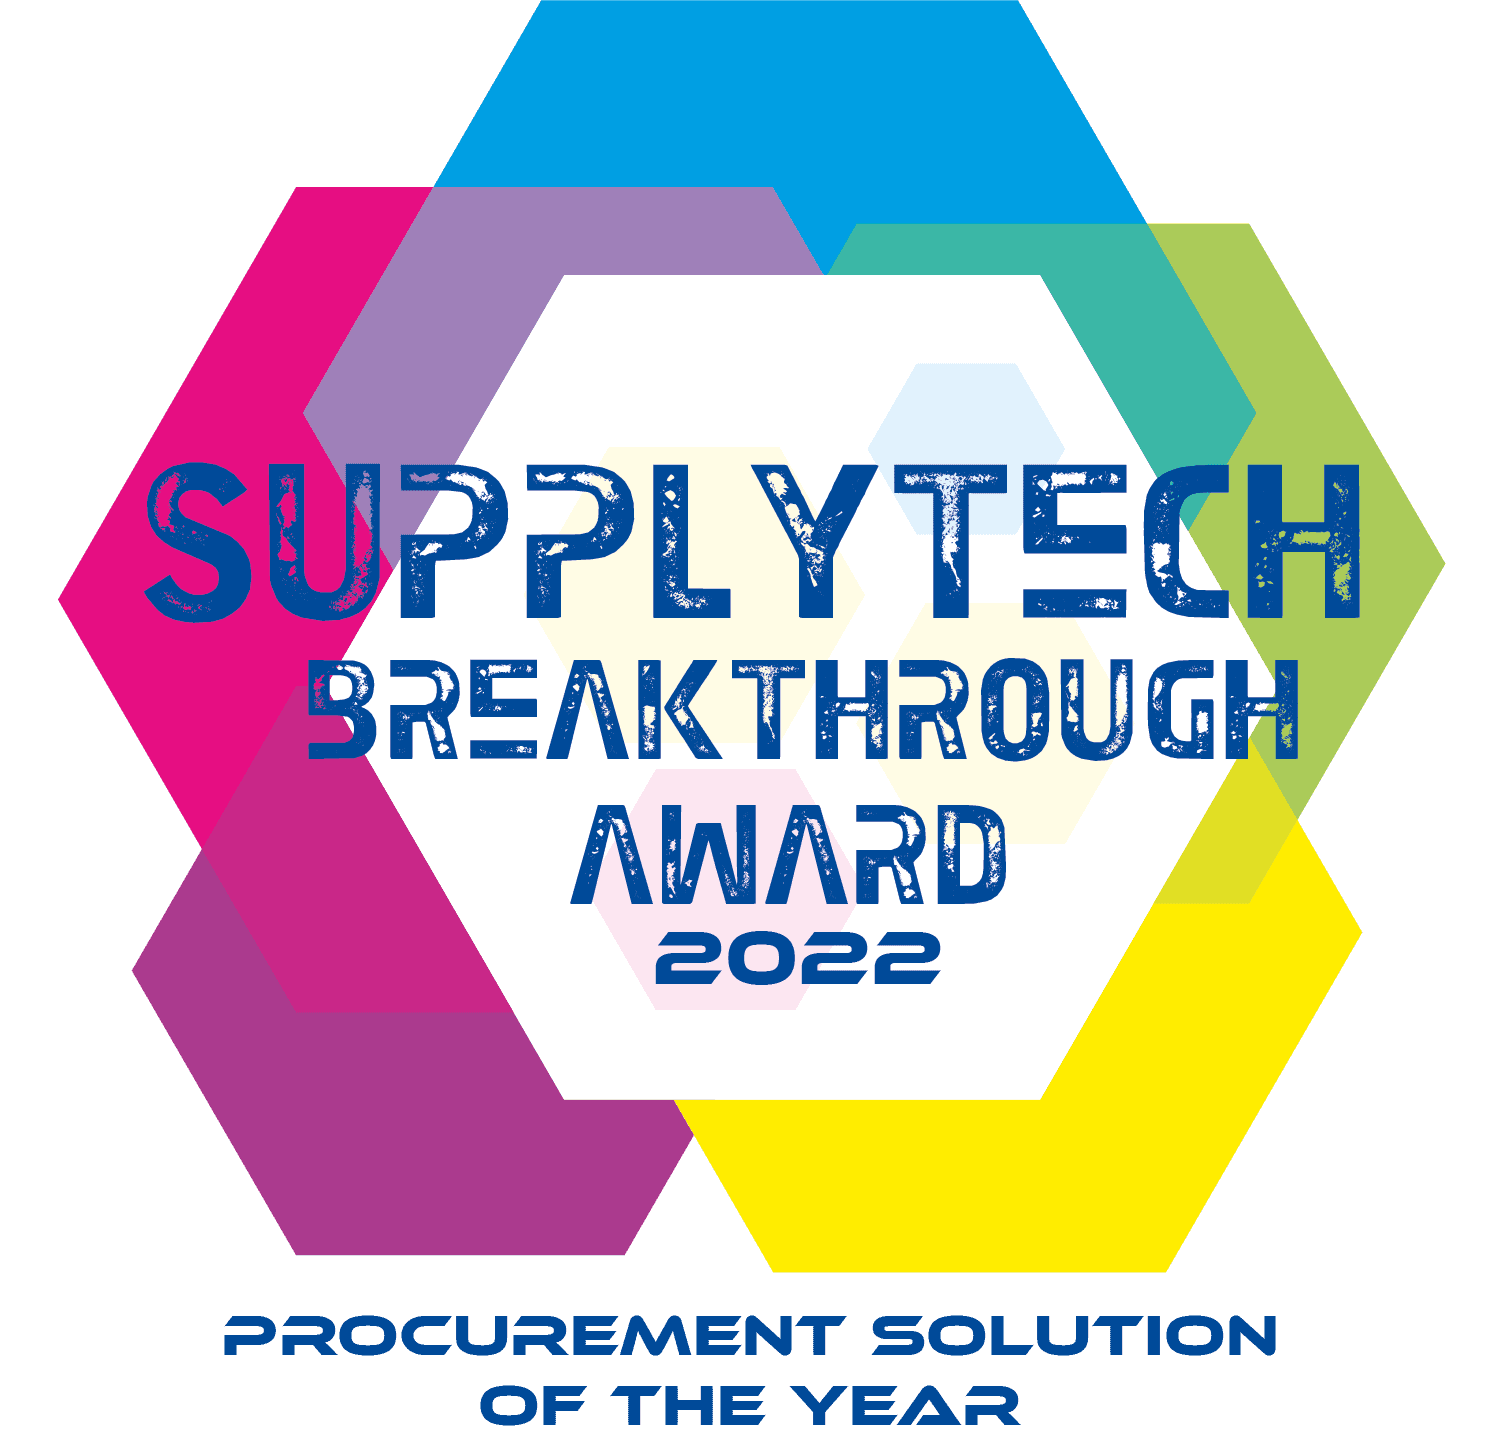 Product Sleek Technologies Awarded “Procurement Solution of the Year” In 2022 SupplyTech Breakthrough Awards Program - sleek-technologies.com image